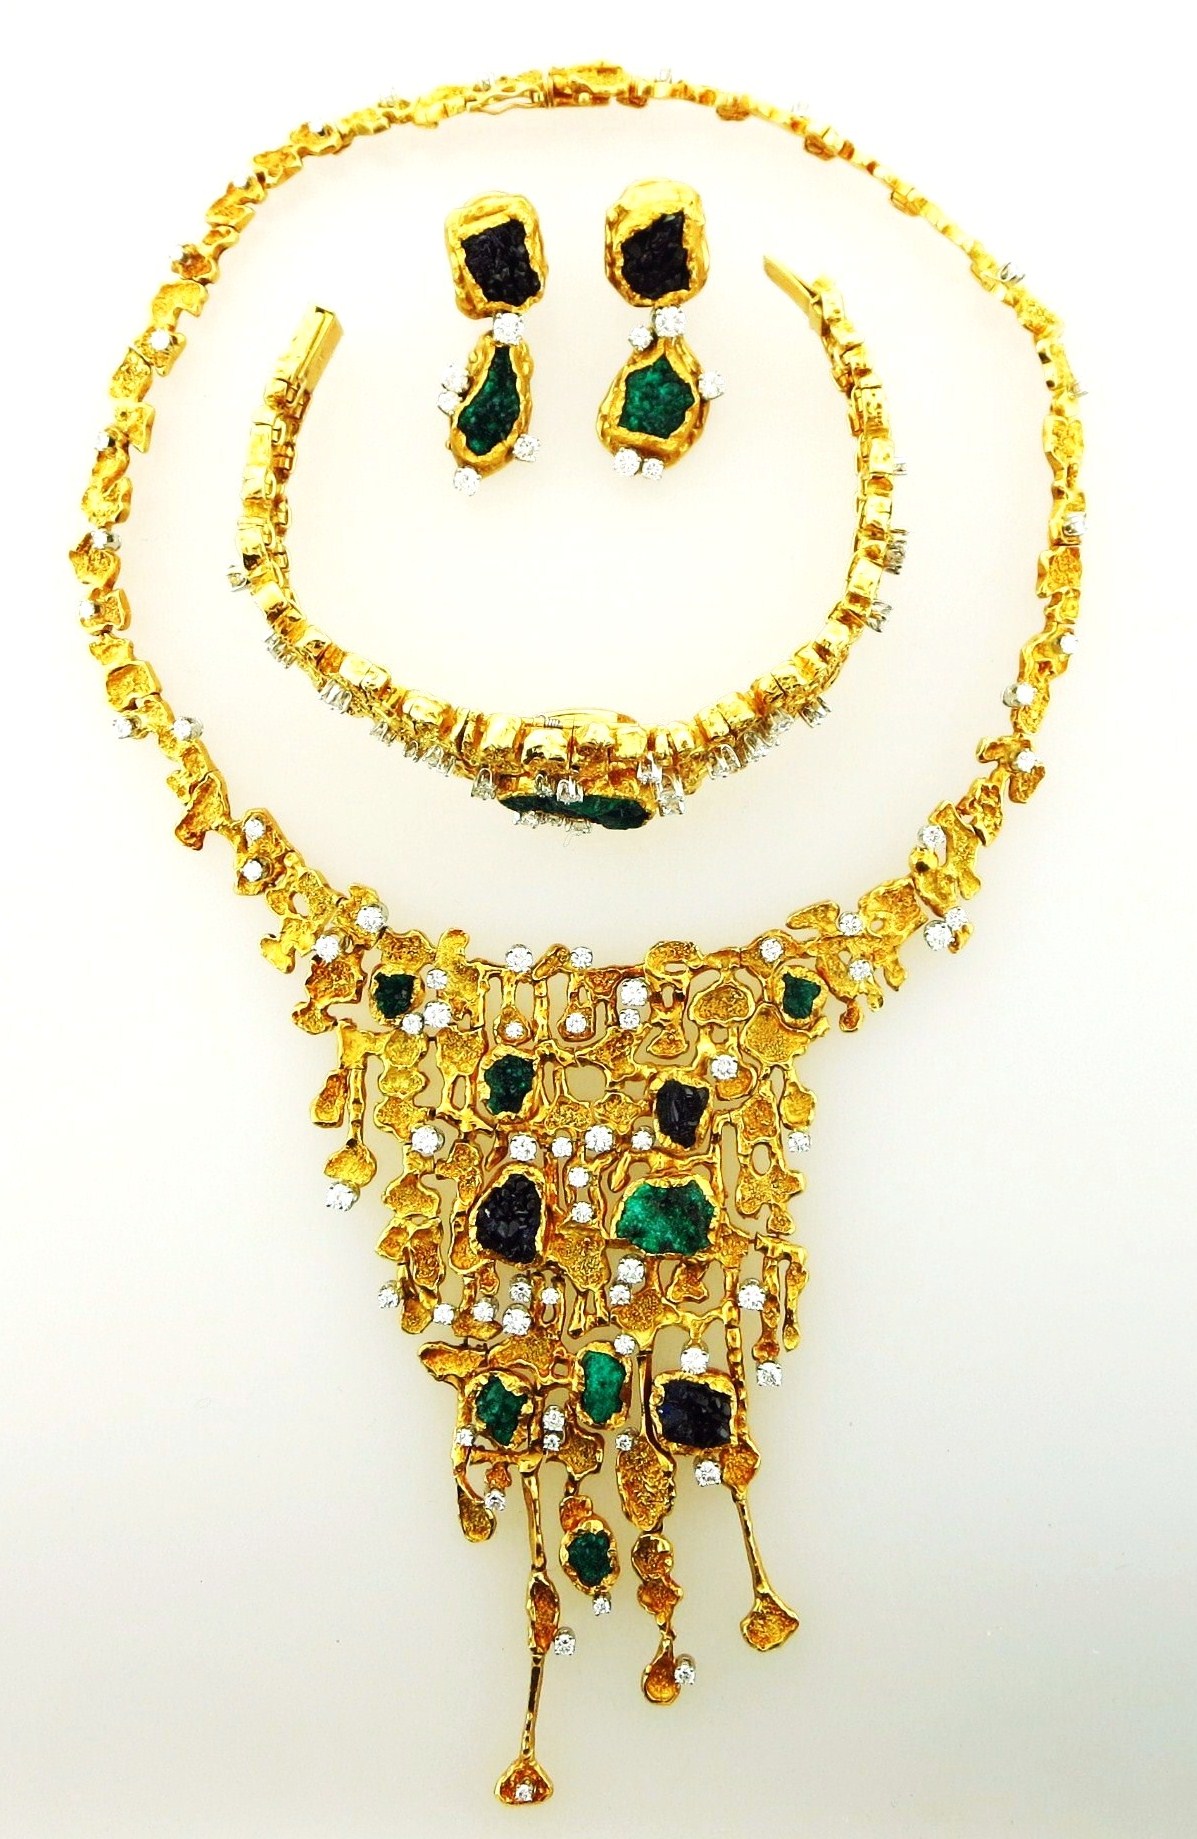 Patek Philippe Yellow Gold, Chrysicola And Asurite Necklace, Earrings And Watch Bracelet. Sold For A Combined Price Of $38,187